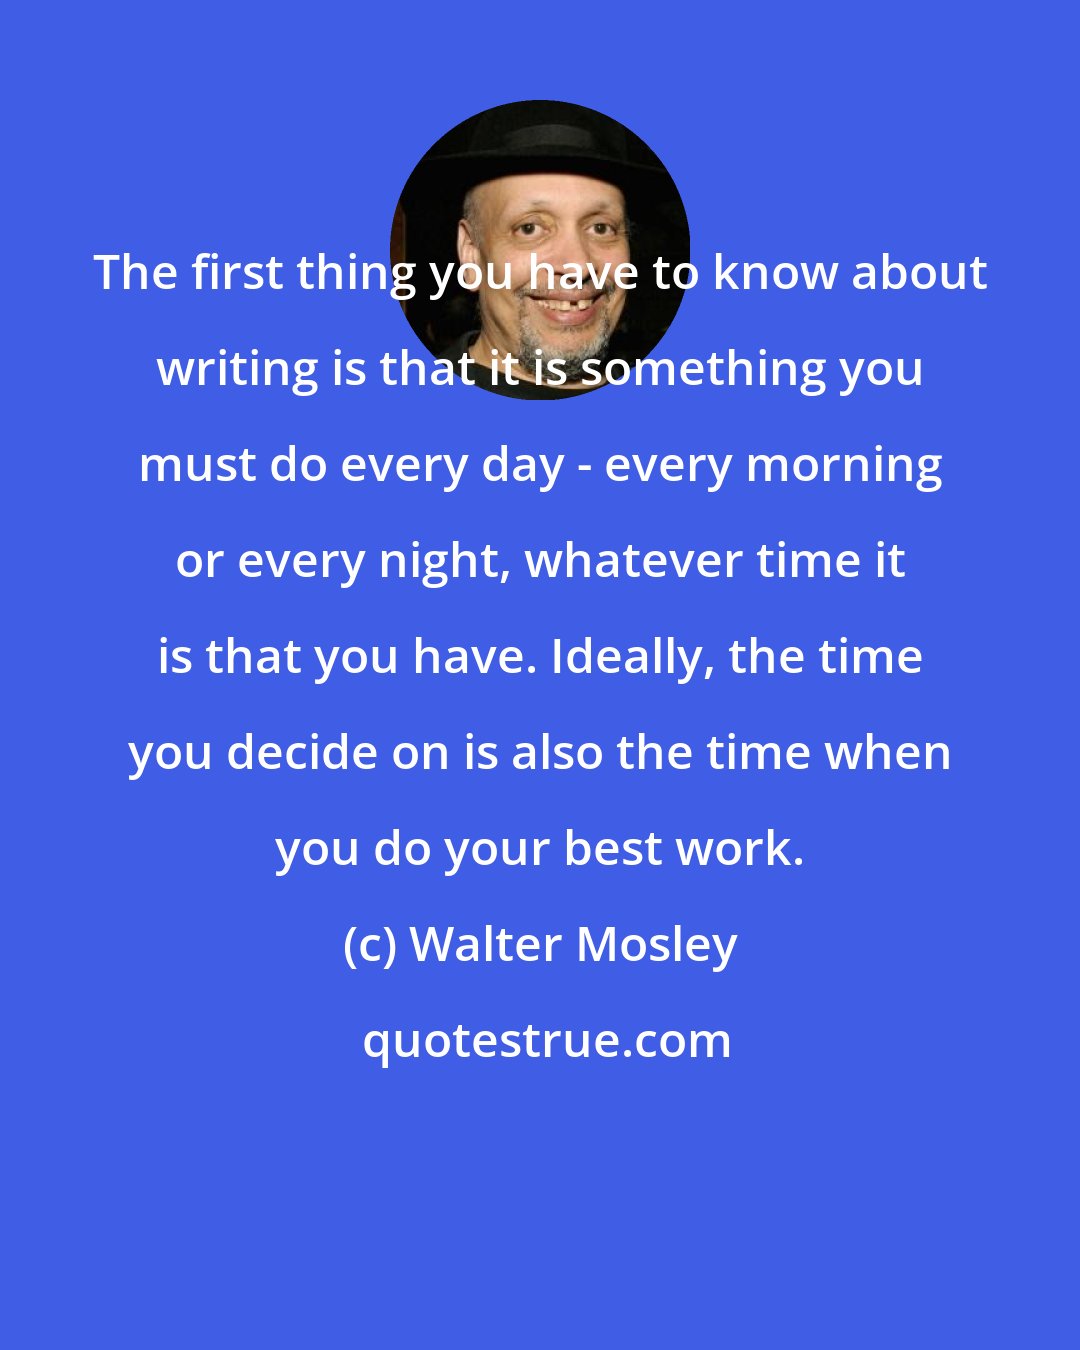 Walter Mosley: The first thing you have to know about writing is that it is something you must do every day - every morning or every night, whatever time it is that you have. Ideally, the time you decide on is also the time when you do your best work.